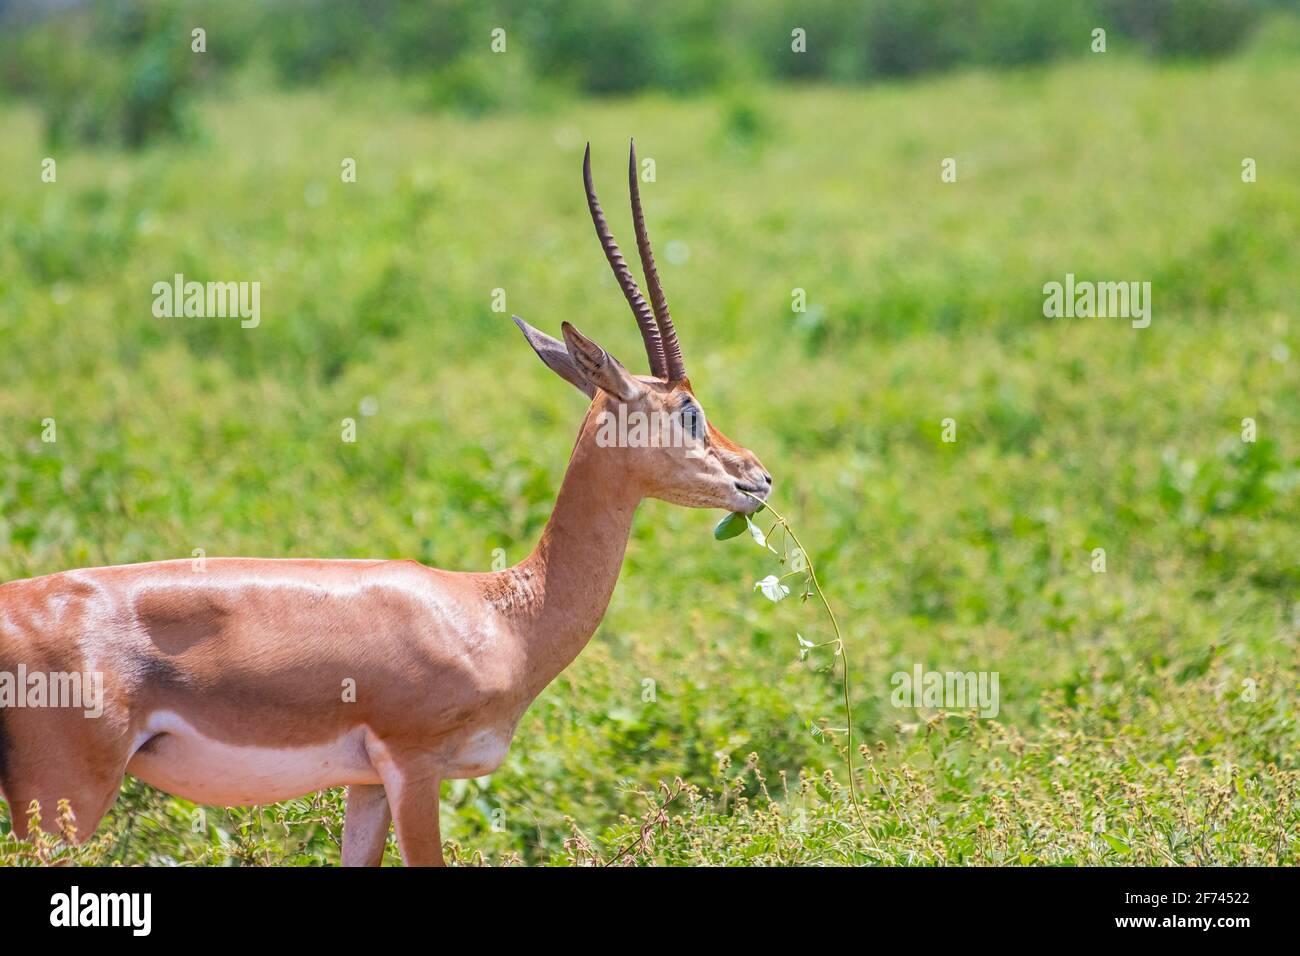 Antelope with big horns stands in the grass and chews in Tsavo East, Kenya. It is a wildlife photo from Africa. It's a beautiful sunny day. Stock Photo